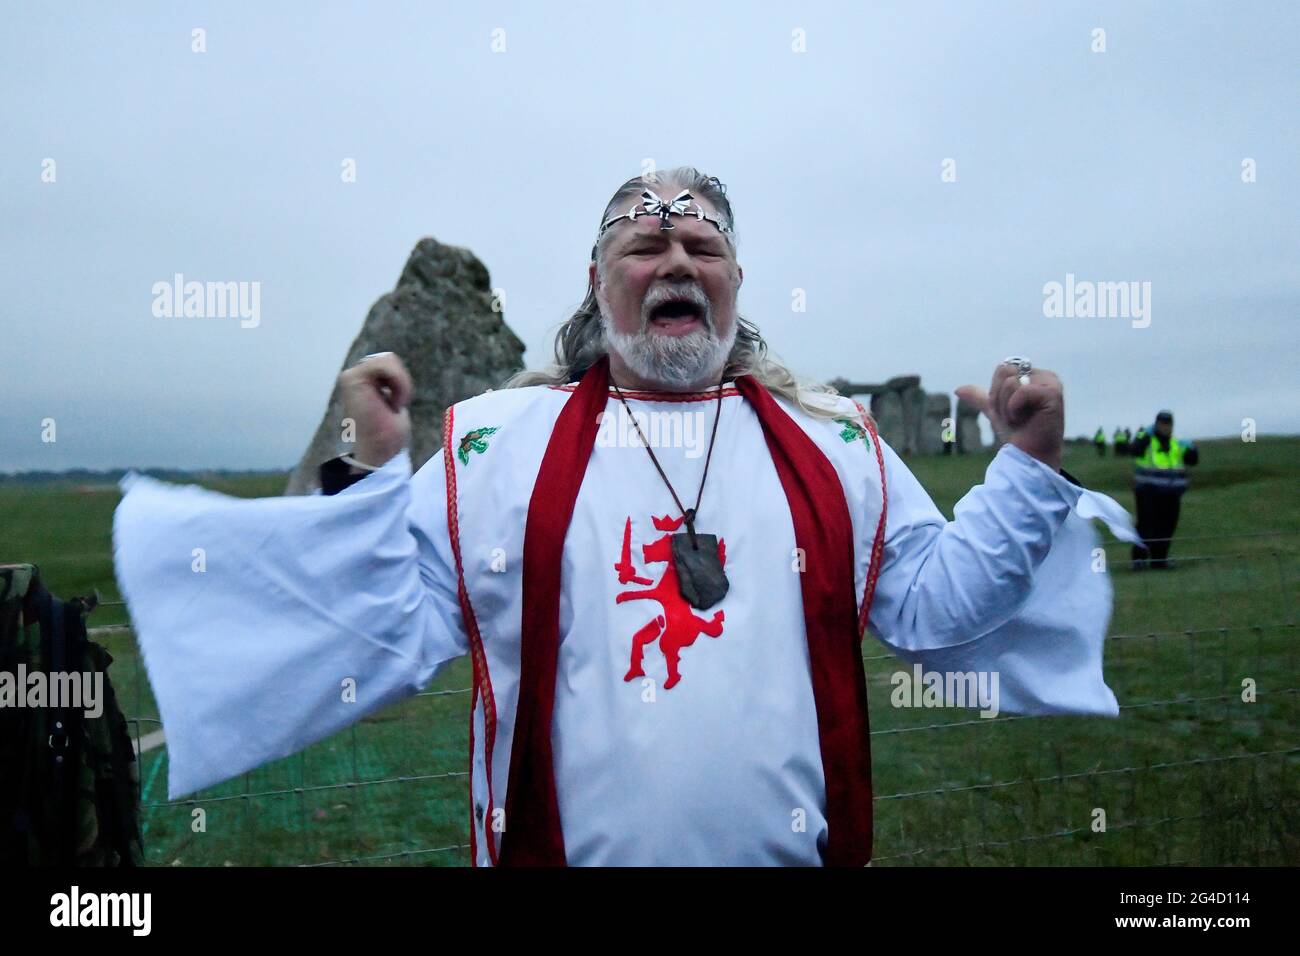 Arch-Druid Arthur Pendragon speaks in front of Stonehenge ancient stone circle, during the celebrations of the Summer Solstice, despite official events being cancelled amid the spread of the coronavirus disease (COVID-19), near Amesbury, Britain, June 21, 2021. REUTERS/Toby Melville Stock Photo